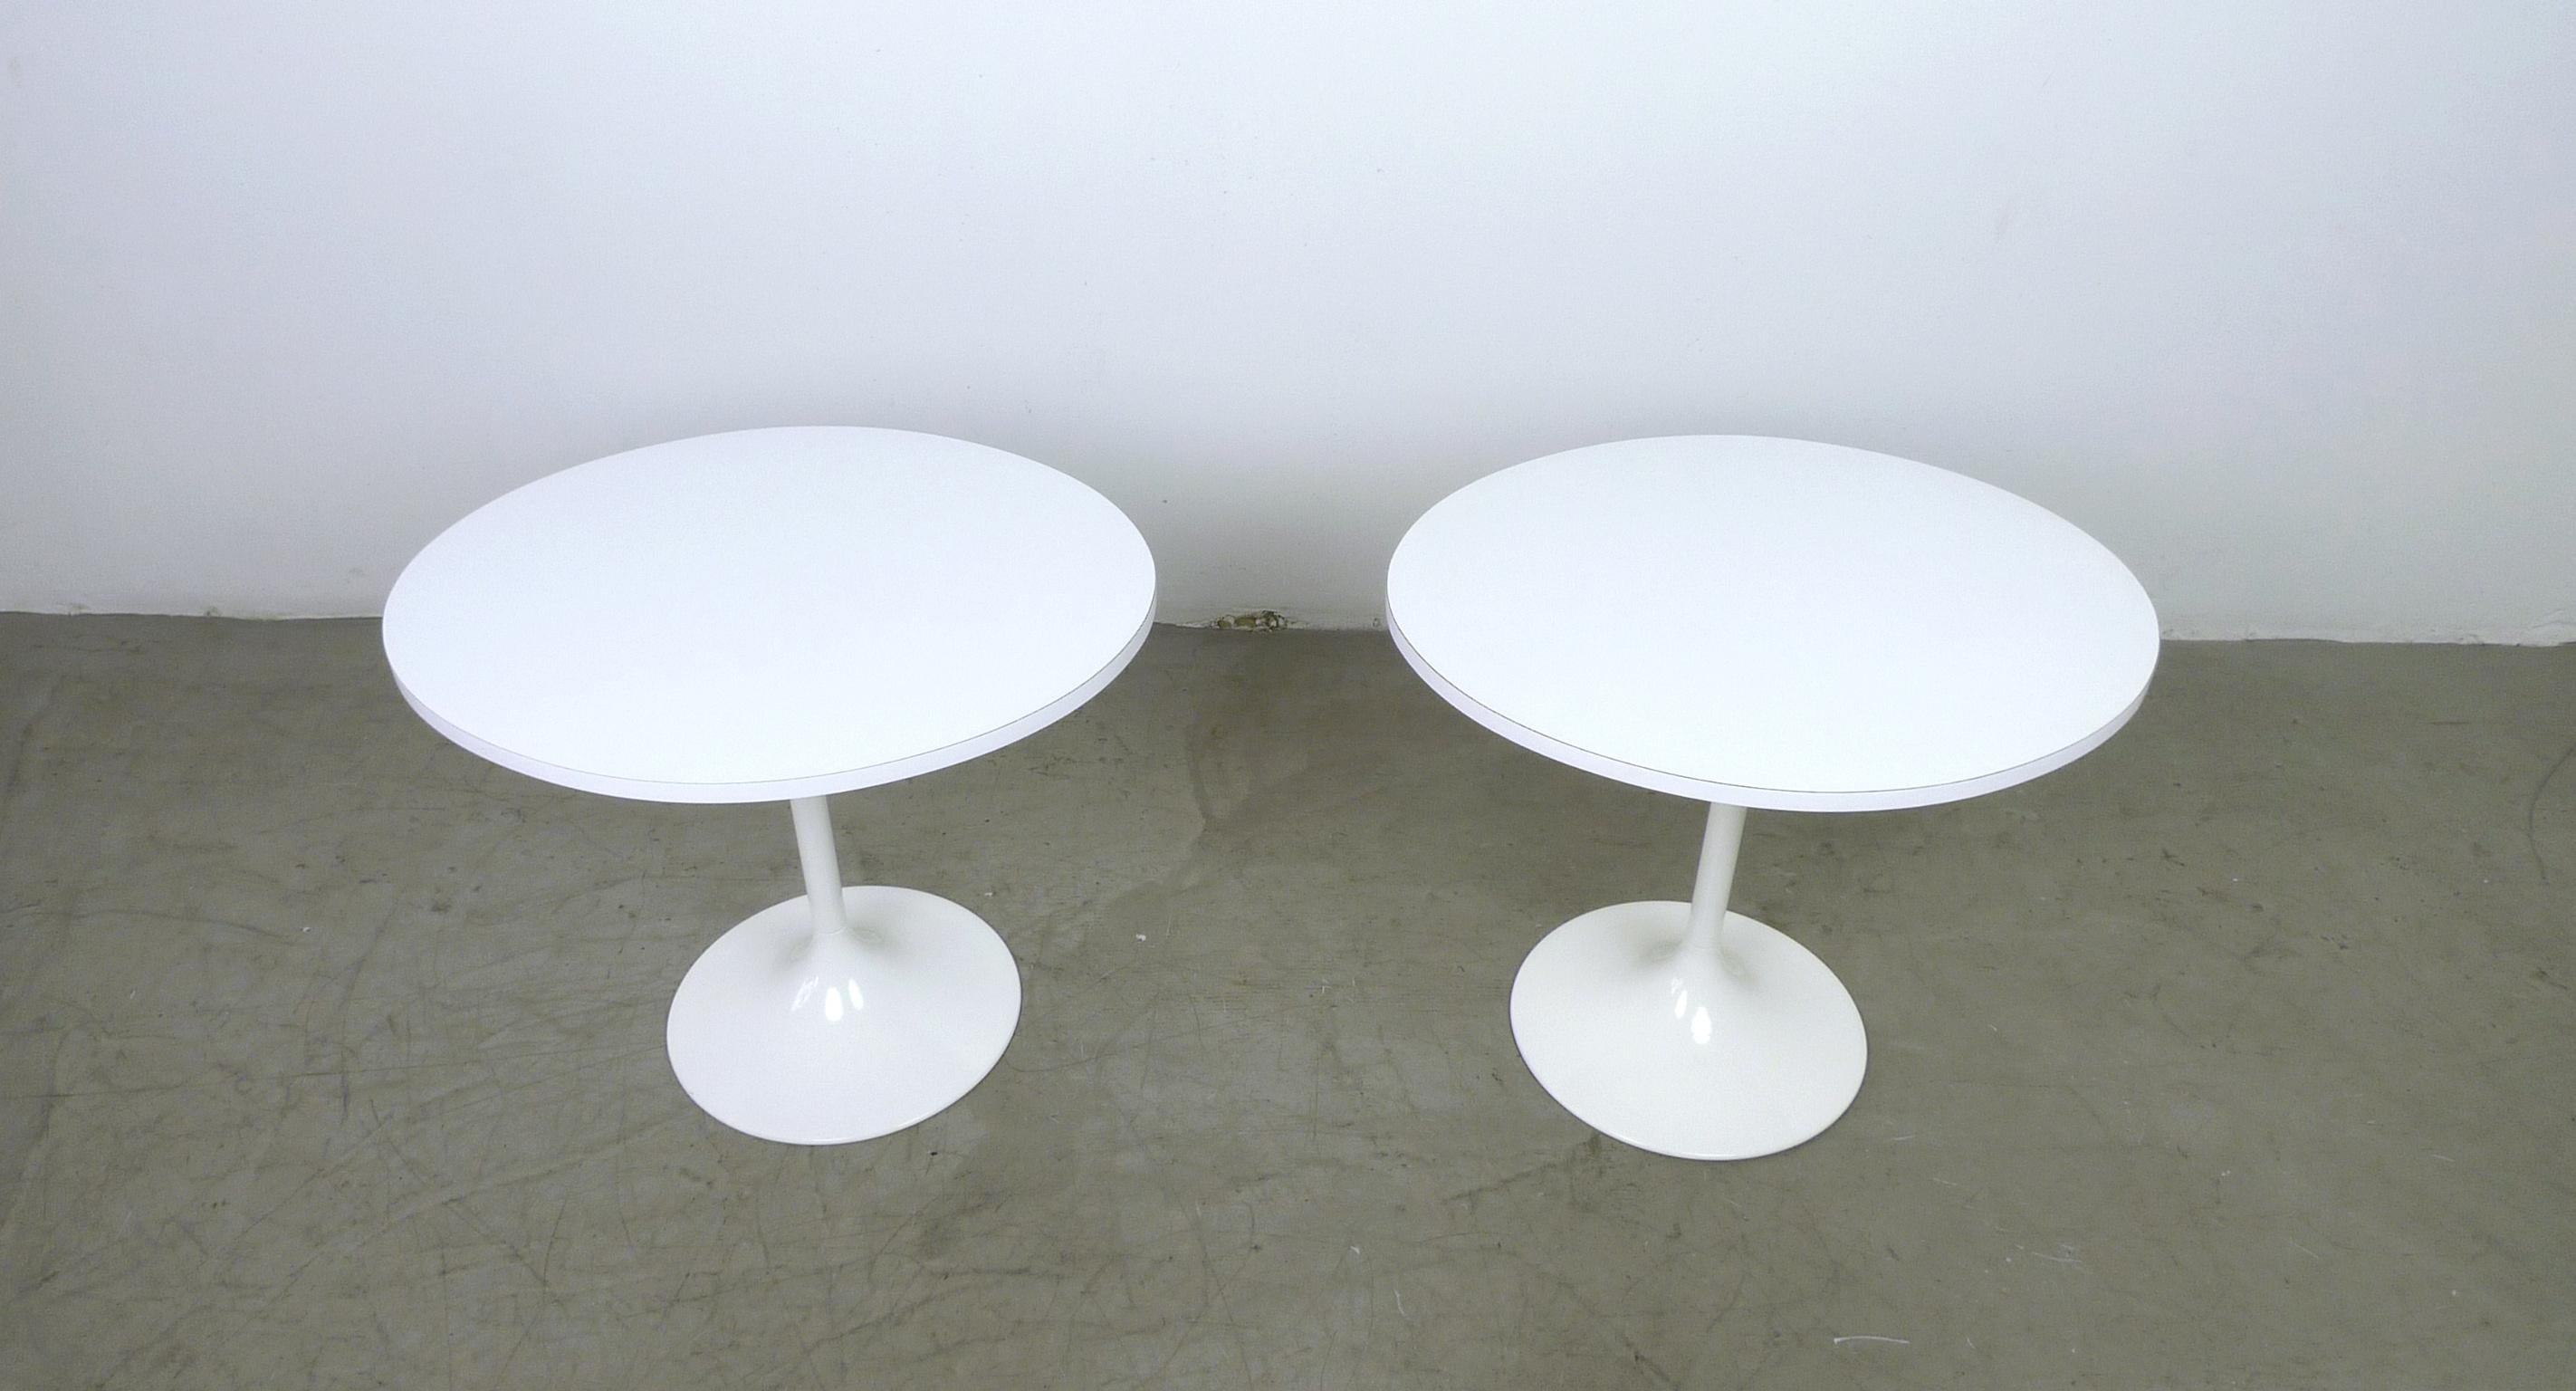 This pair of white side tables features oval tops and painted metal tulip bases. The tables were produced in Germany in the 1970s and they are in very good condition.